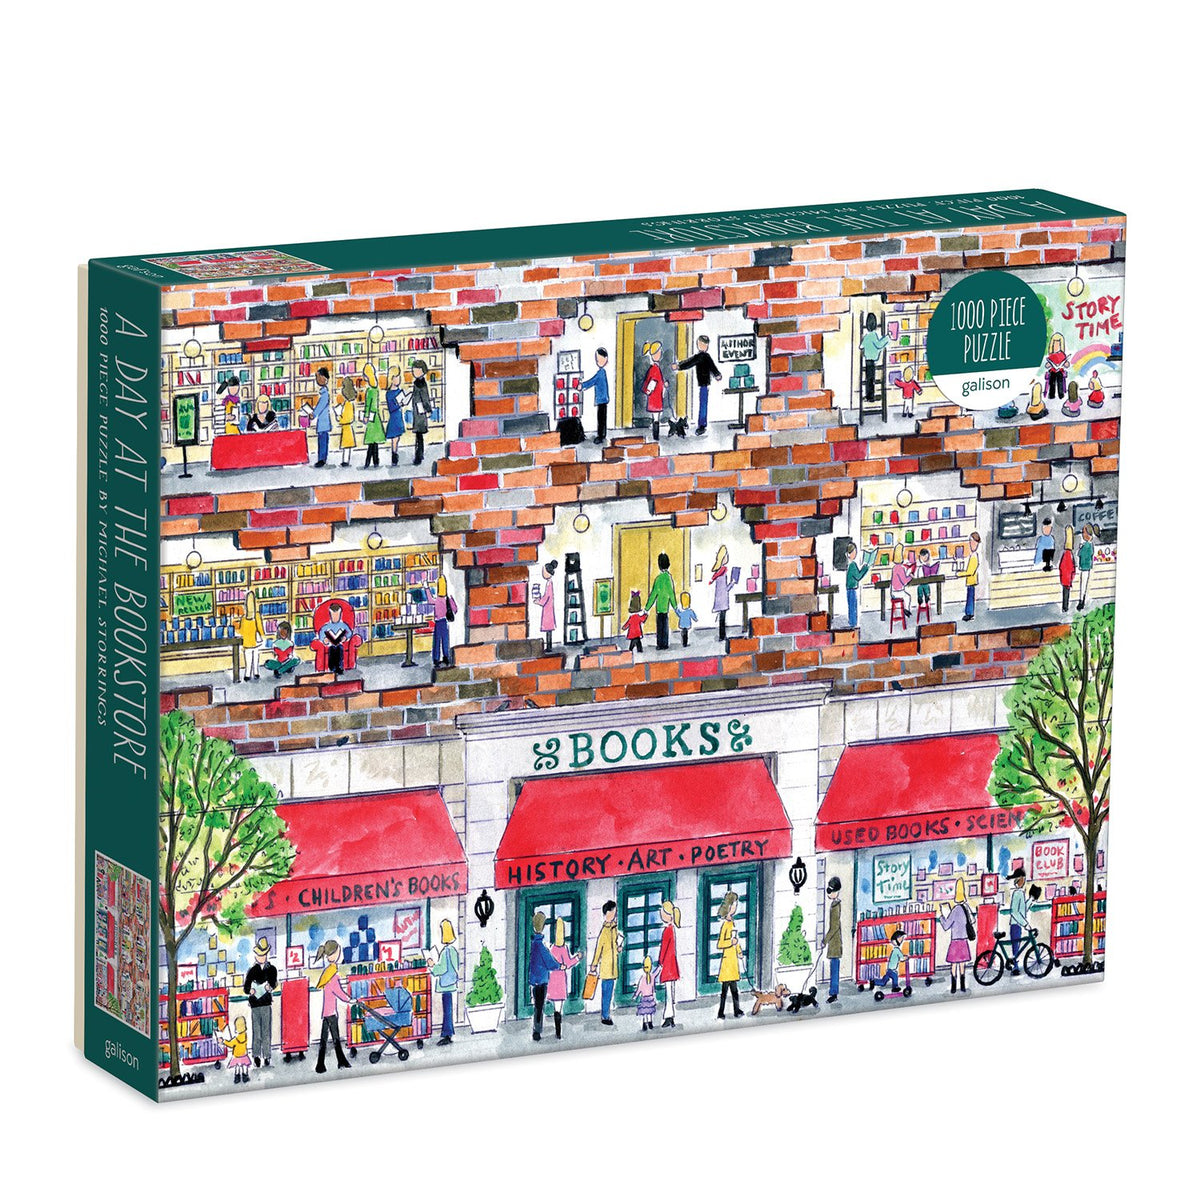 Lastig Extractie long Michael Storrings A Day at the Bookstore 1000 Piece Puzzle | Galison